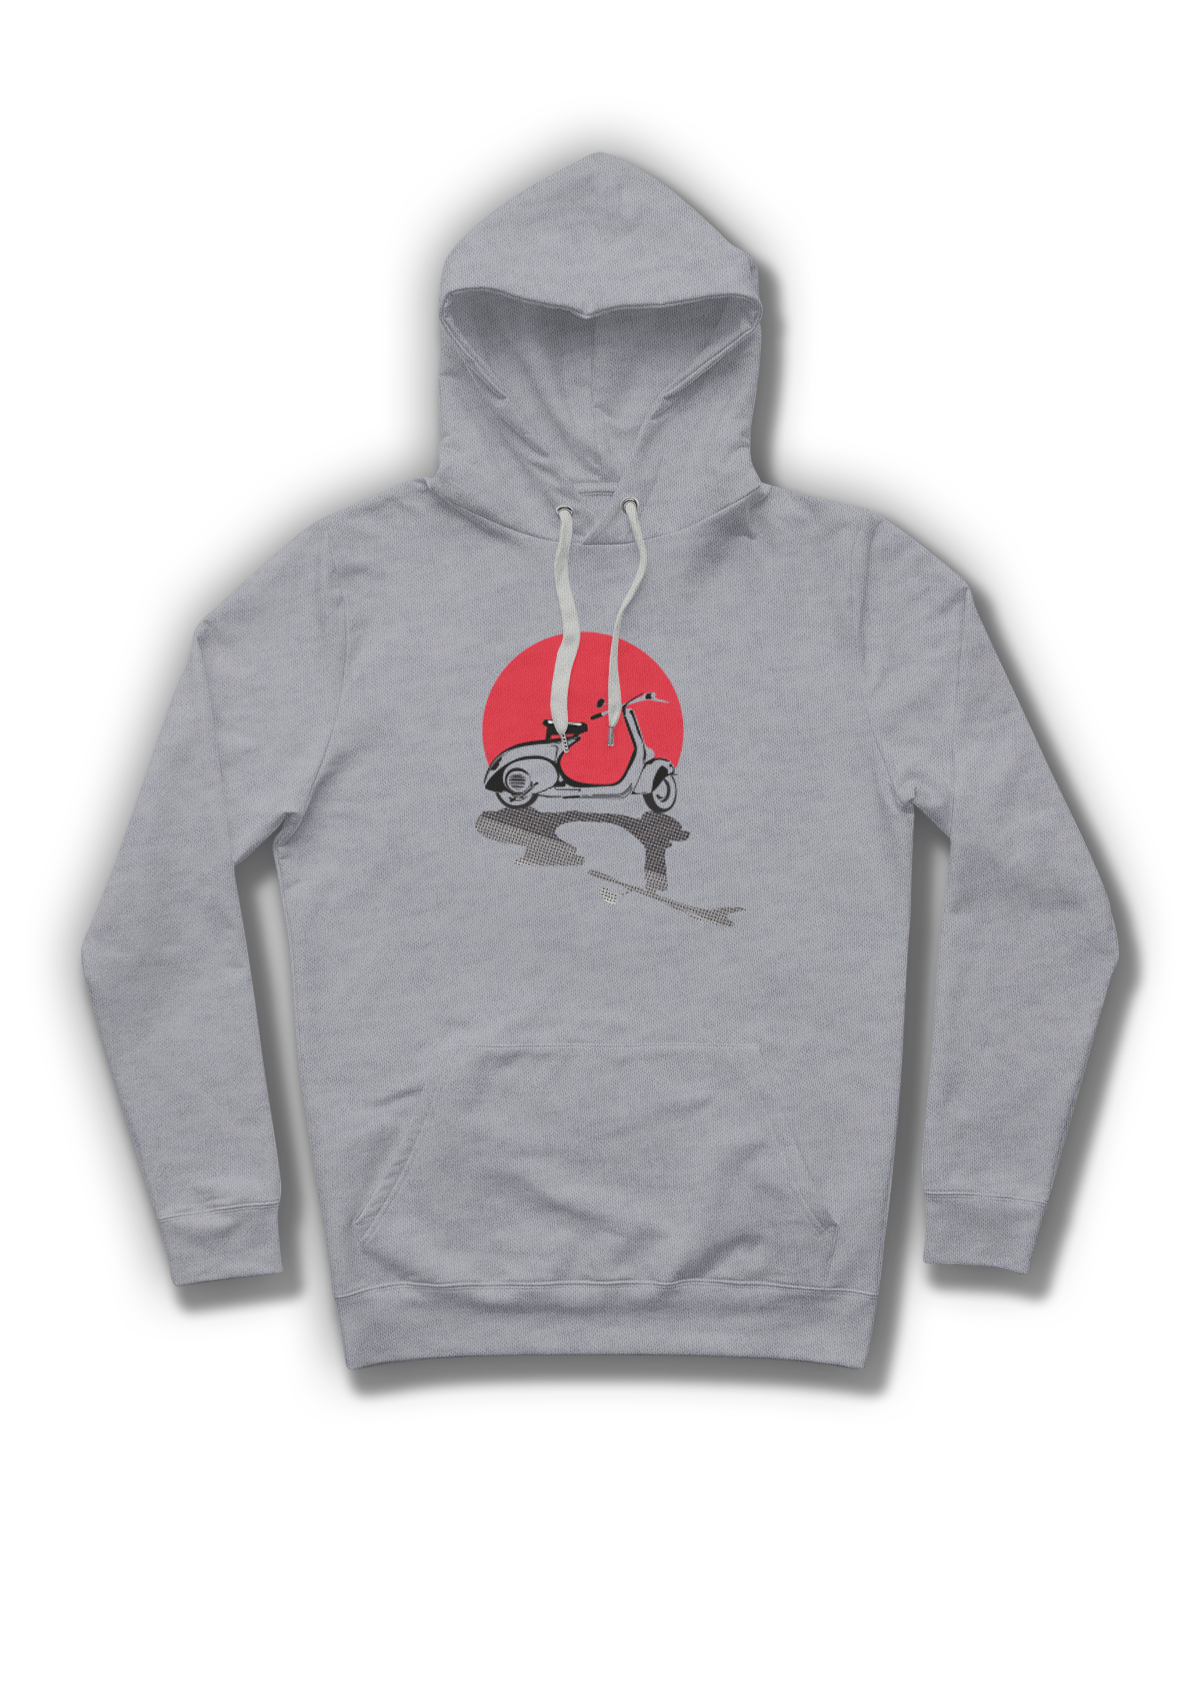 Gettin' forward in style Part No.2 Hoodie